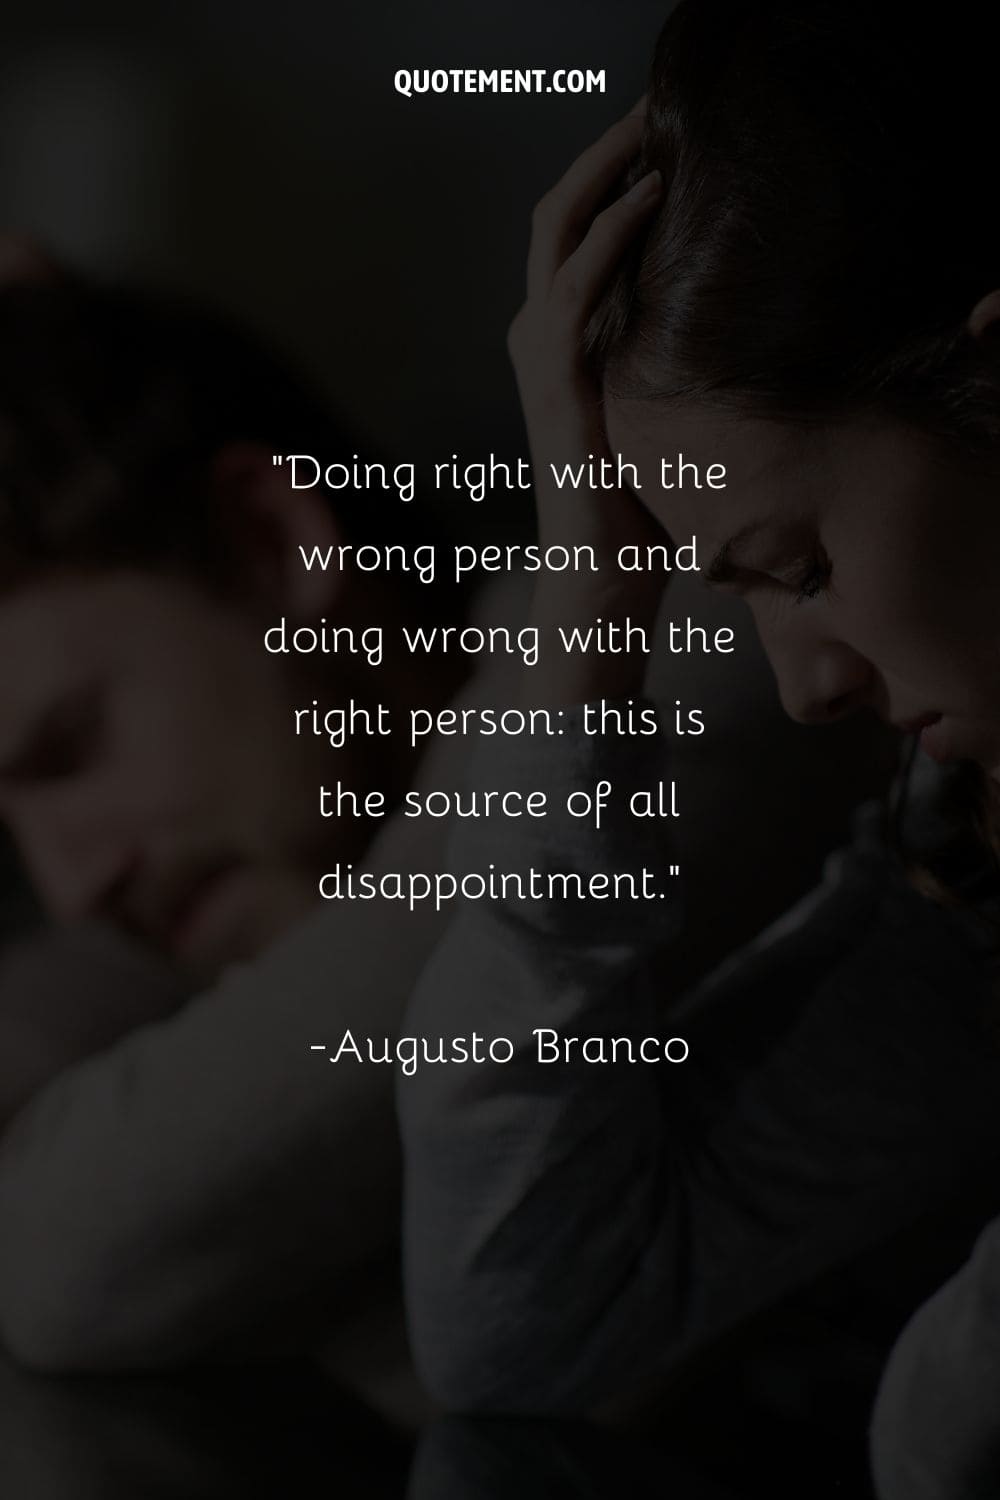 Doing right with the wrong person and doing wrong with the right person this is the source of all disappointment